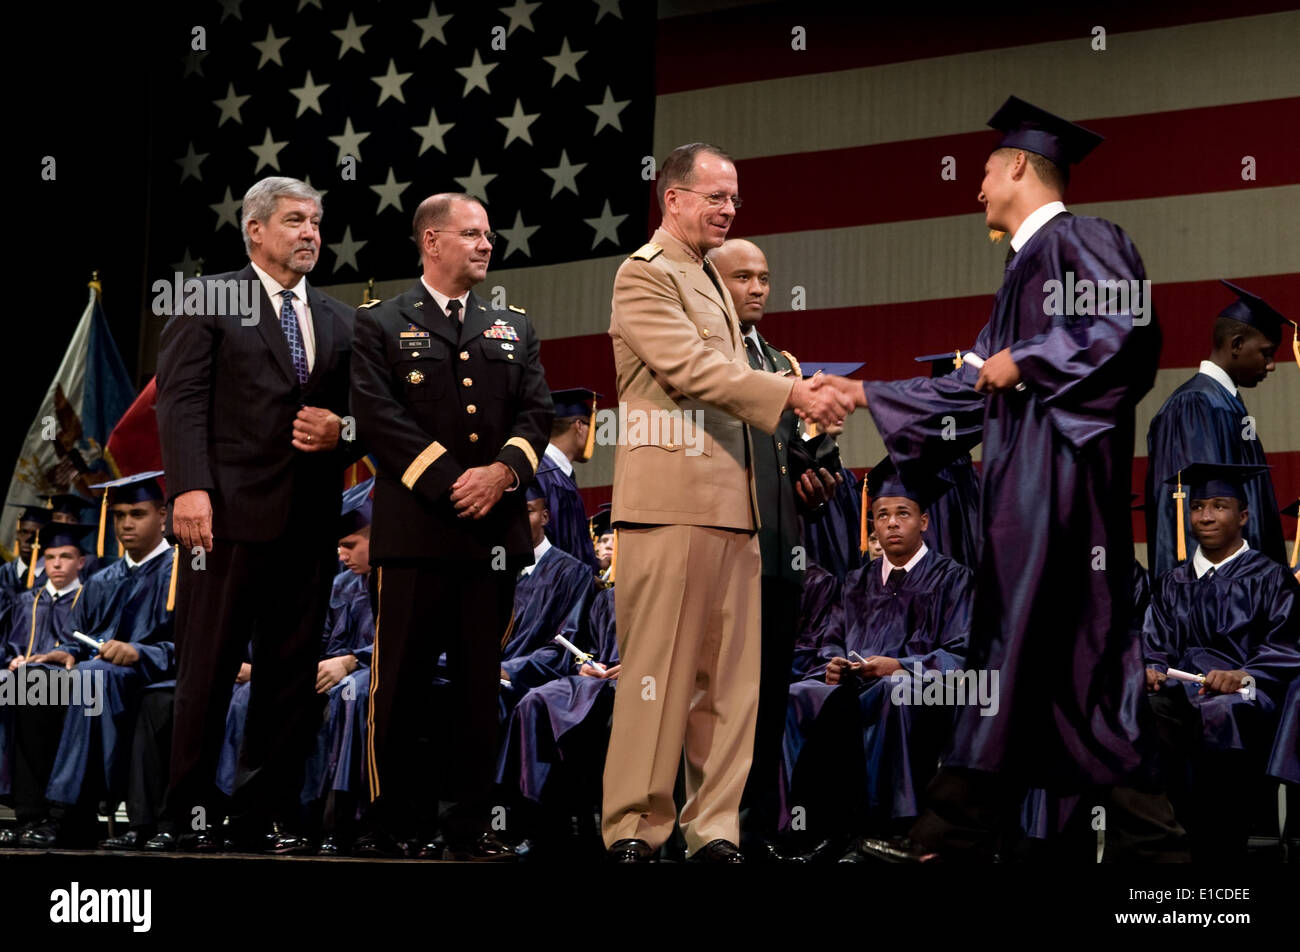 Chairman of the Joint Chiefs of Staff Navy Adm. Mike Mullen congratulates graduates of the New Jersey National Guard Youth Chal Stock Photo